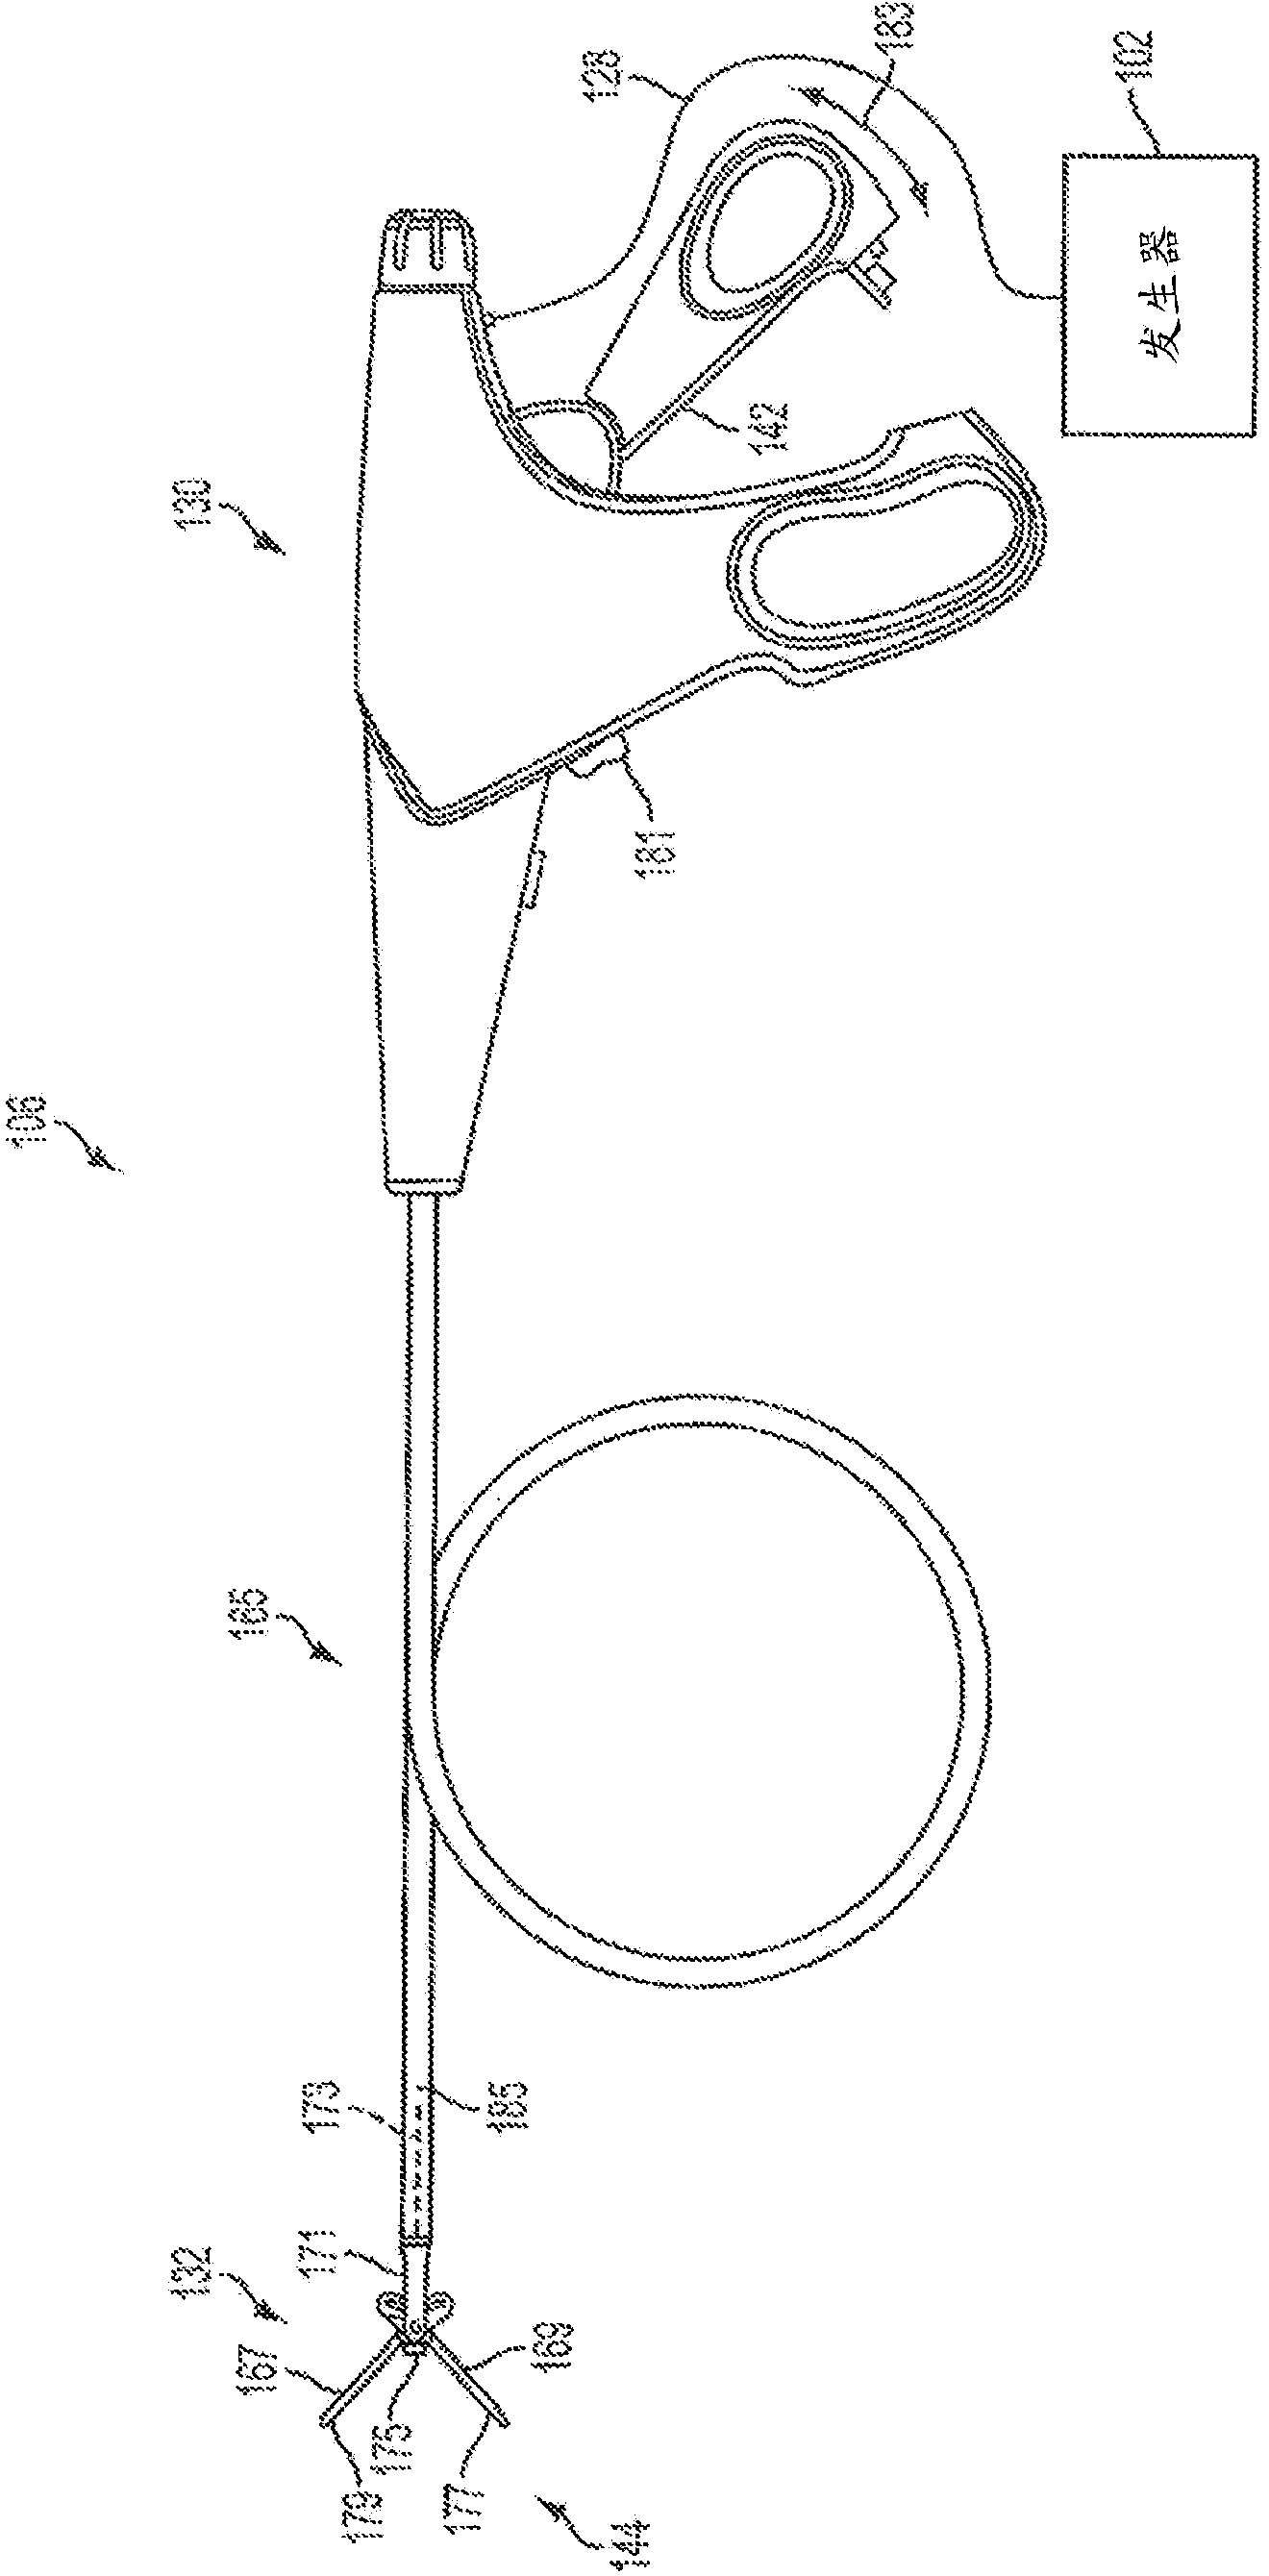 Control circuit of a surgical device with a switch and a method for determining the state of the switch